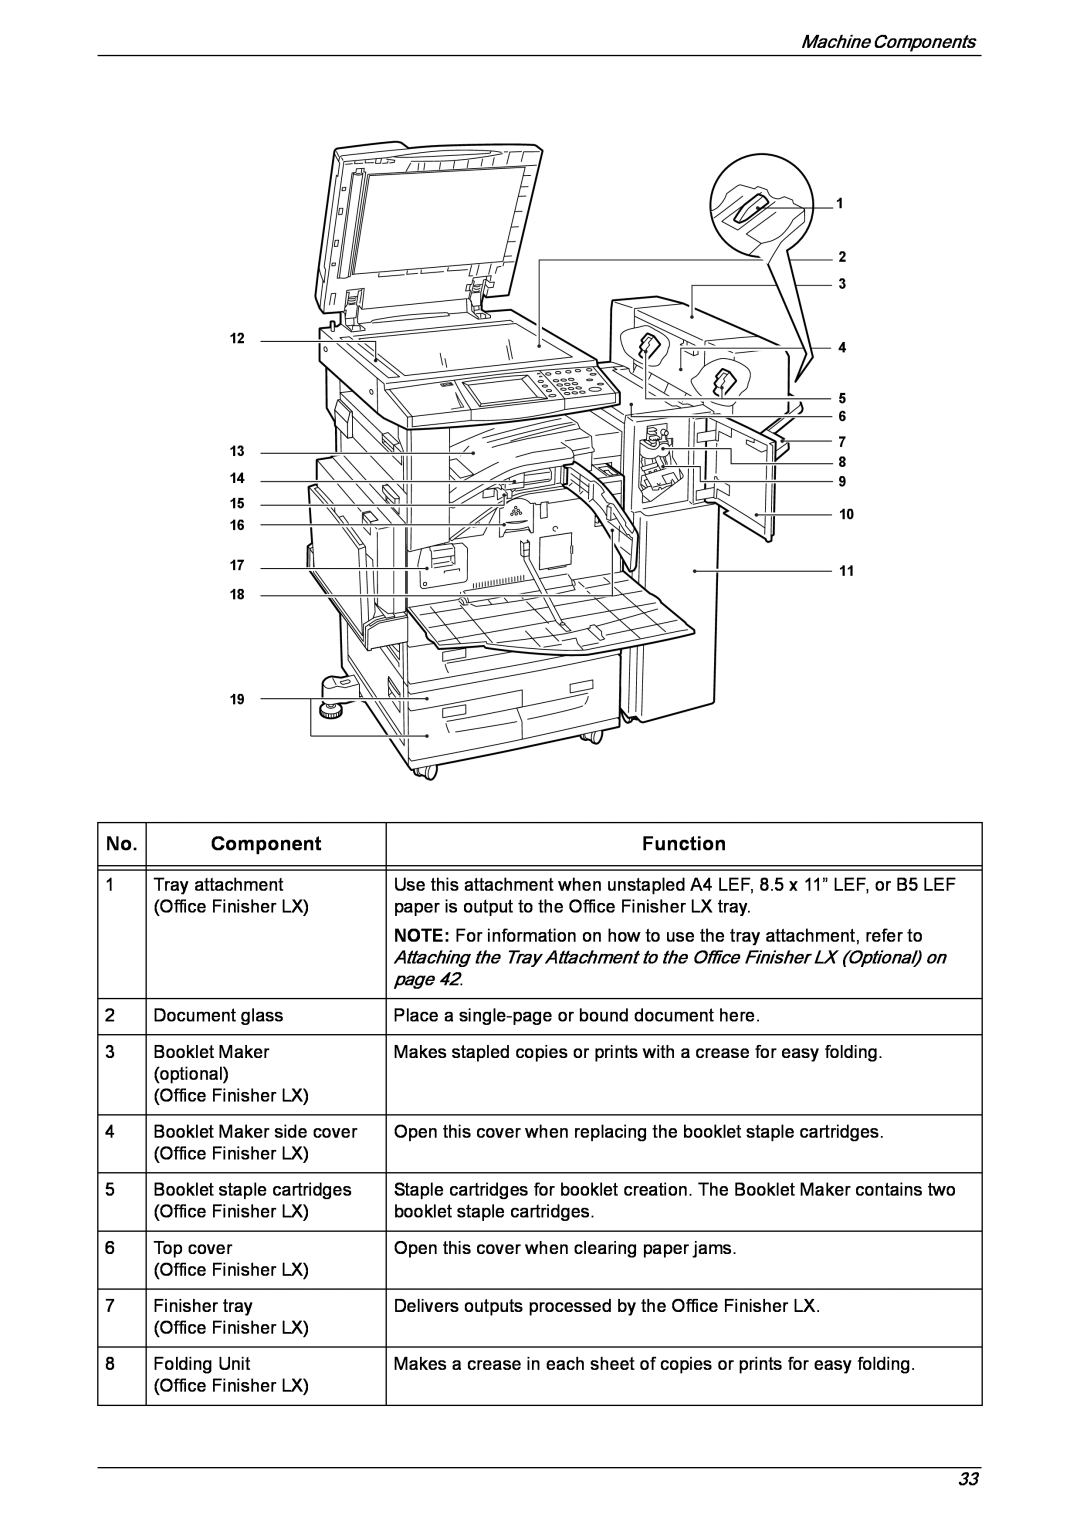 Xerox 5230 manual Function, Machine Components, Tray attachment, page 